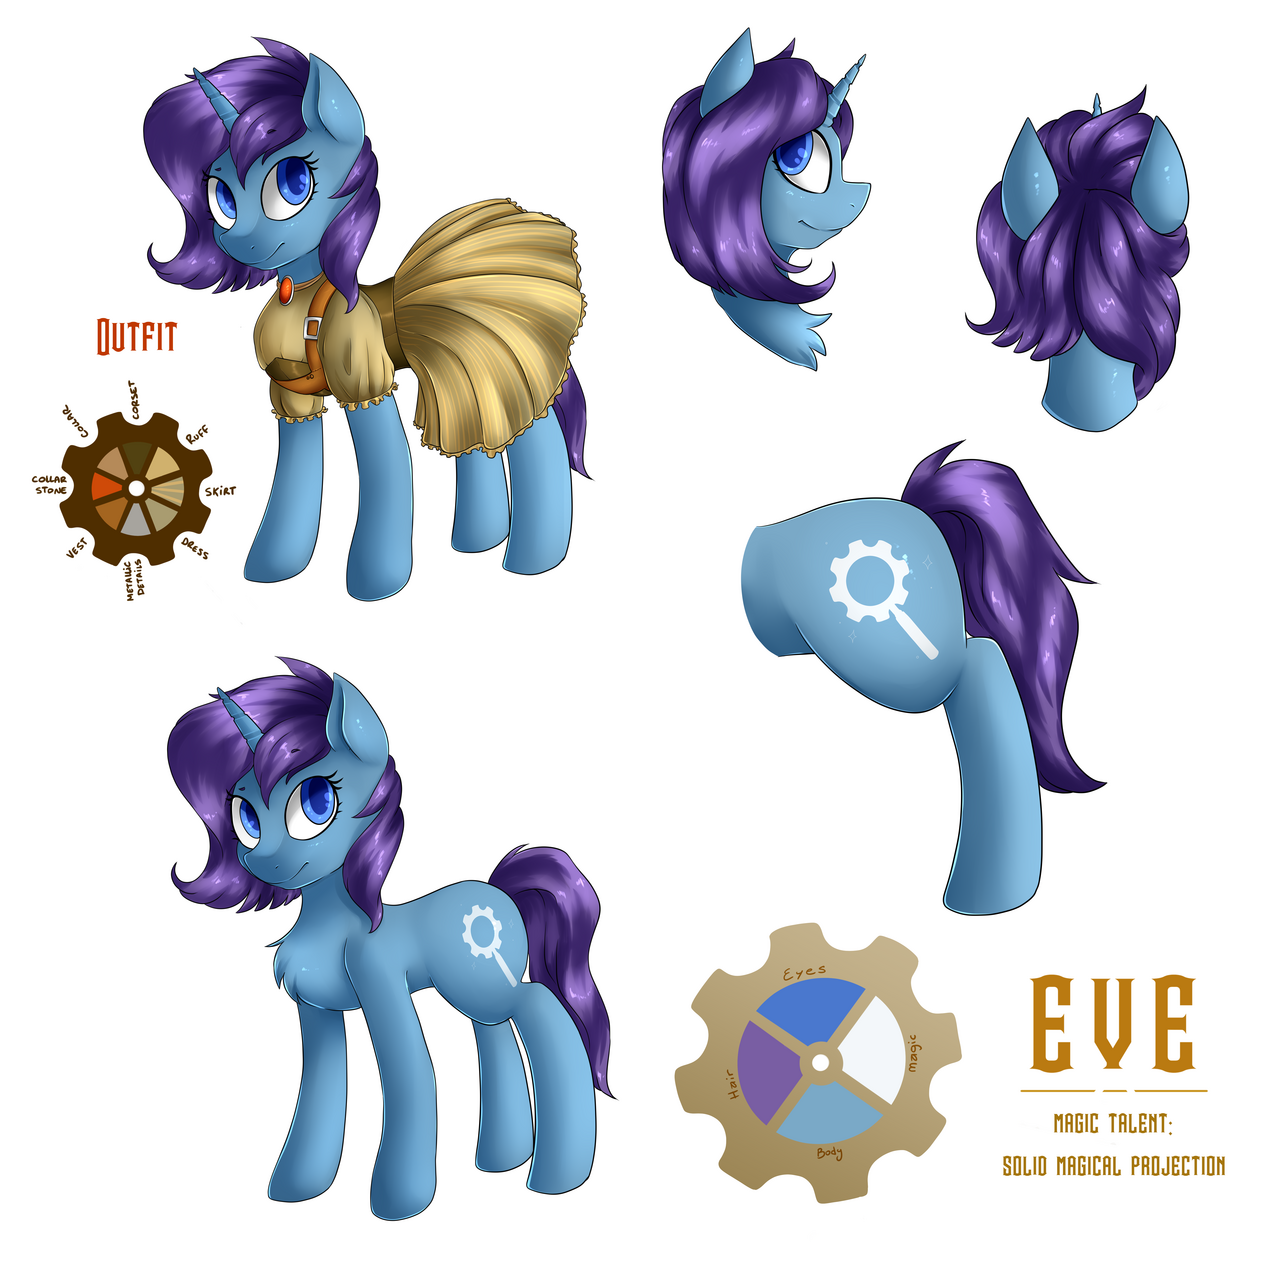 Eve steampunk version reference sheet, casual wear